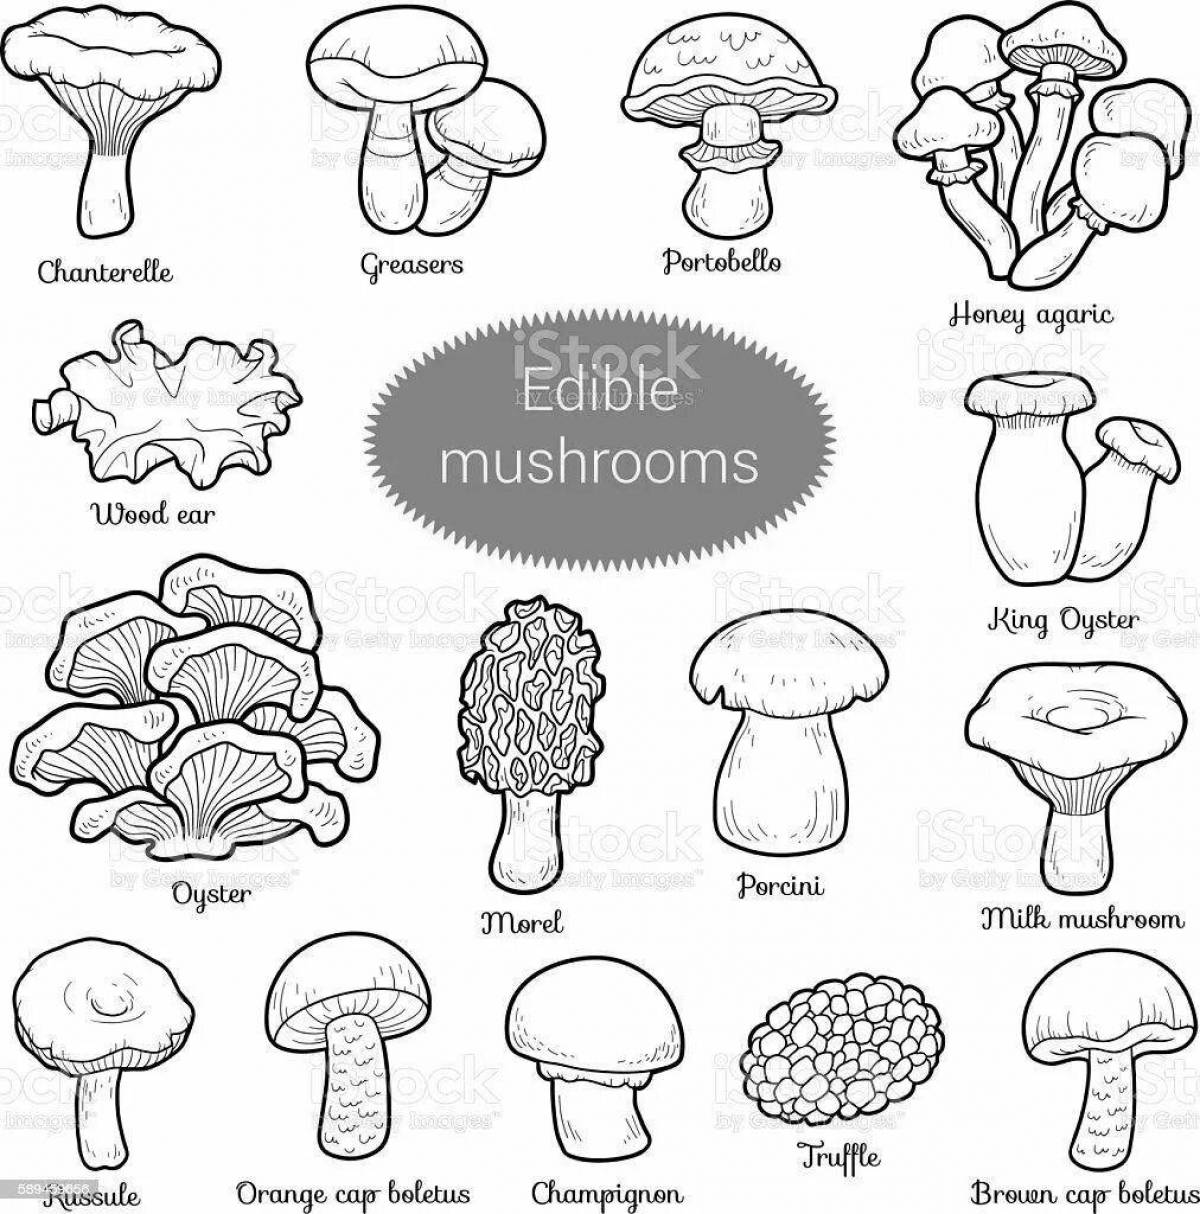 Coloring page beckoning poisonous mushrooms